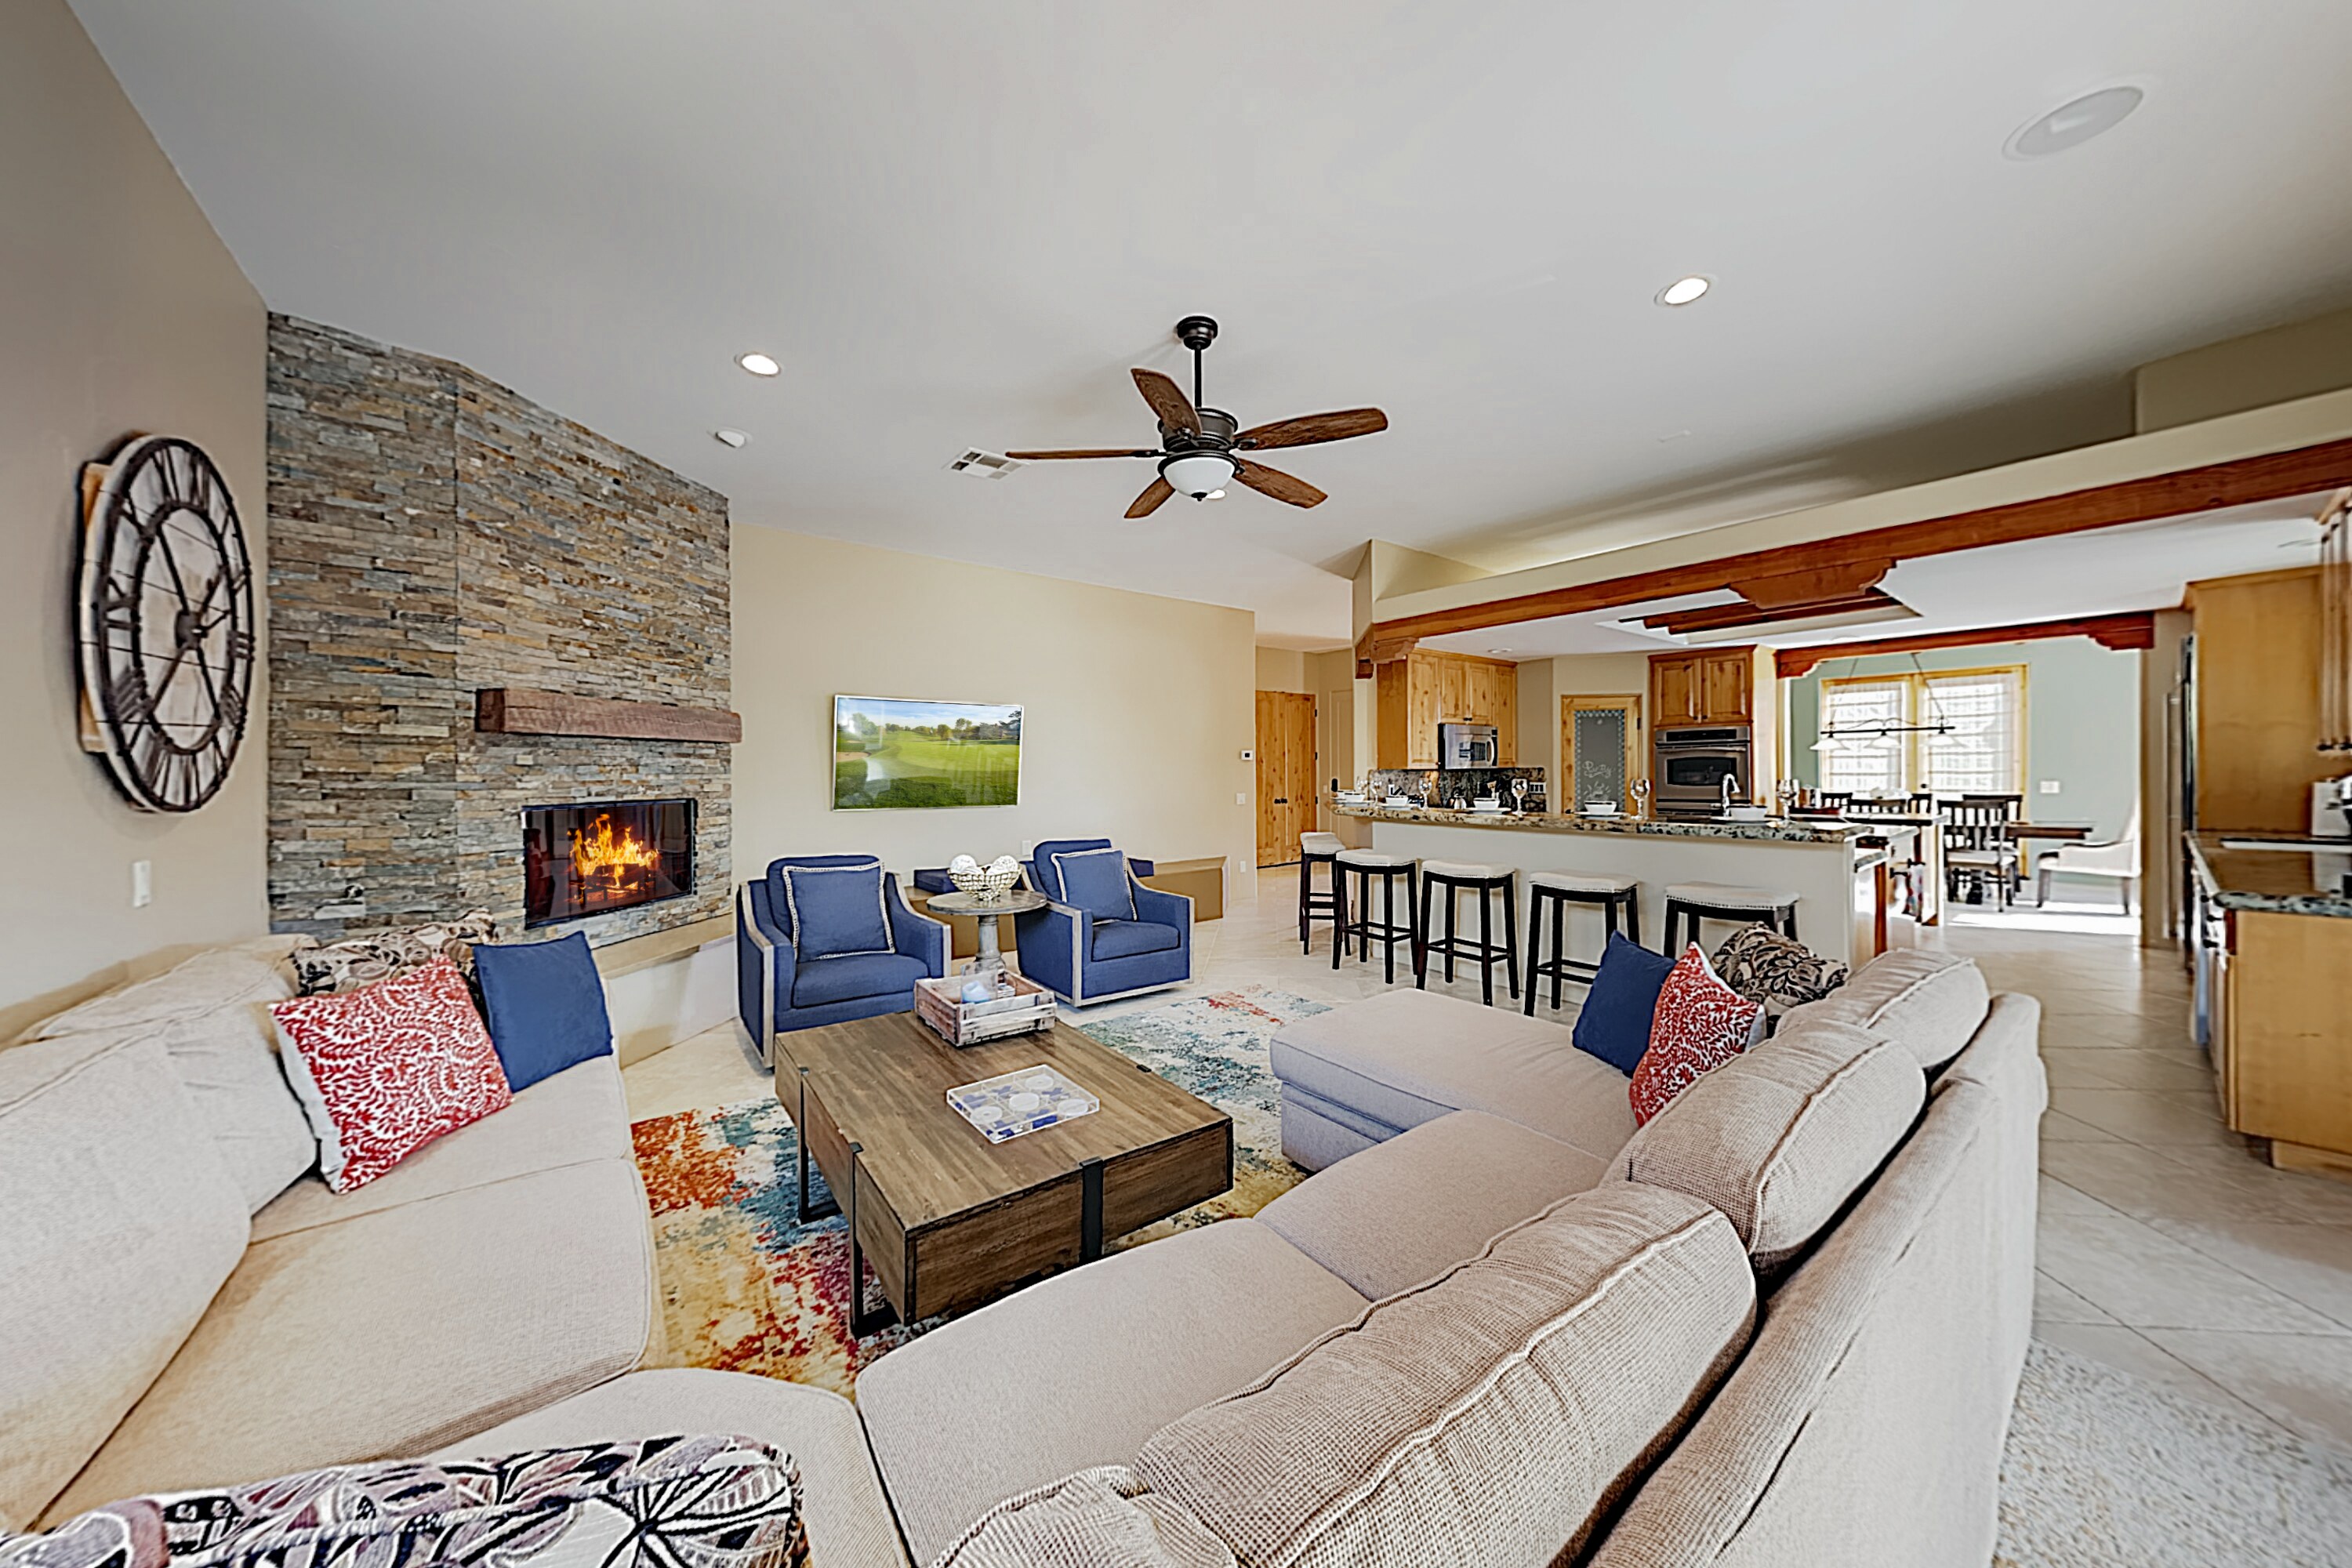 Unwind on the plush sectional and 2 armchairs in the living area.